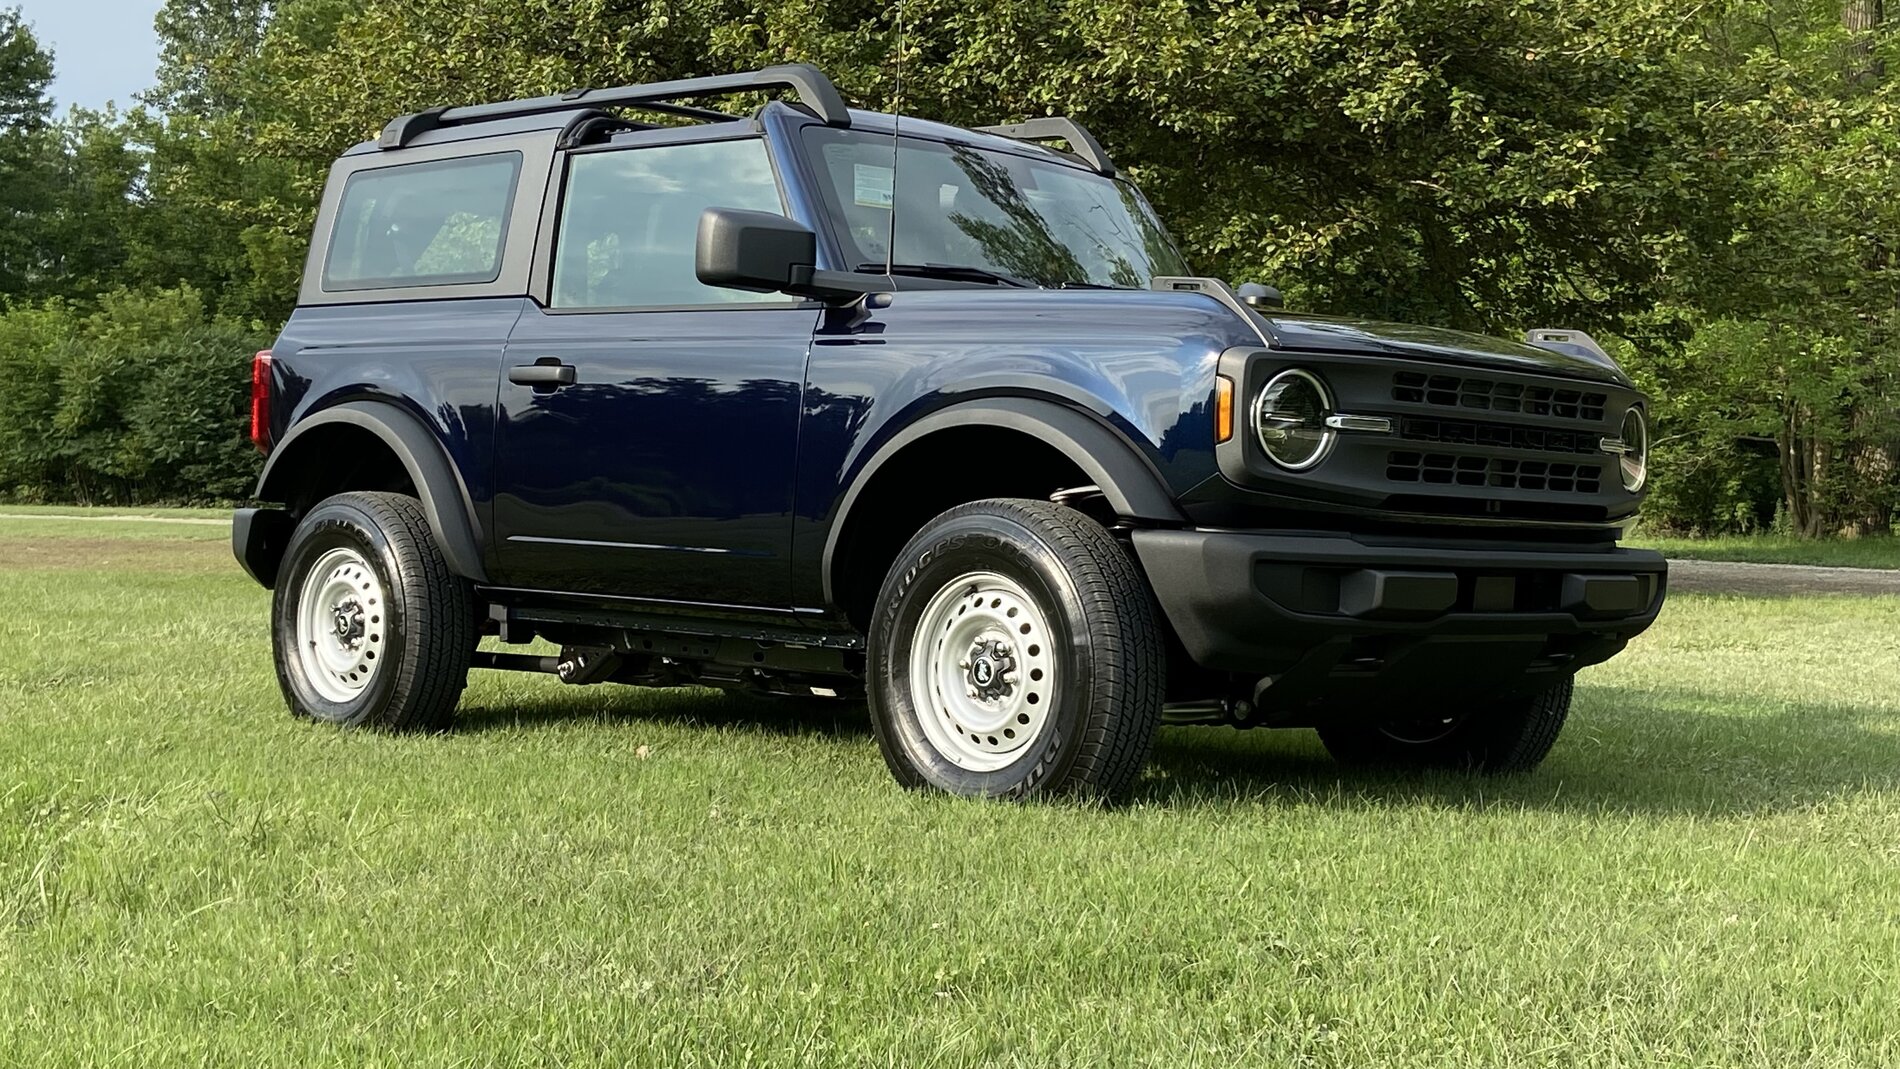 Ford Bronco Thoughts on 2 dr vs 4 dr drivability? tempImageqf2EDW